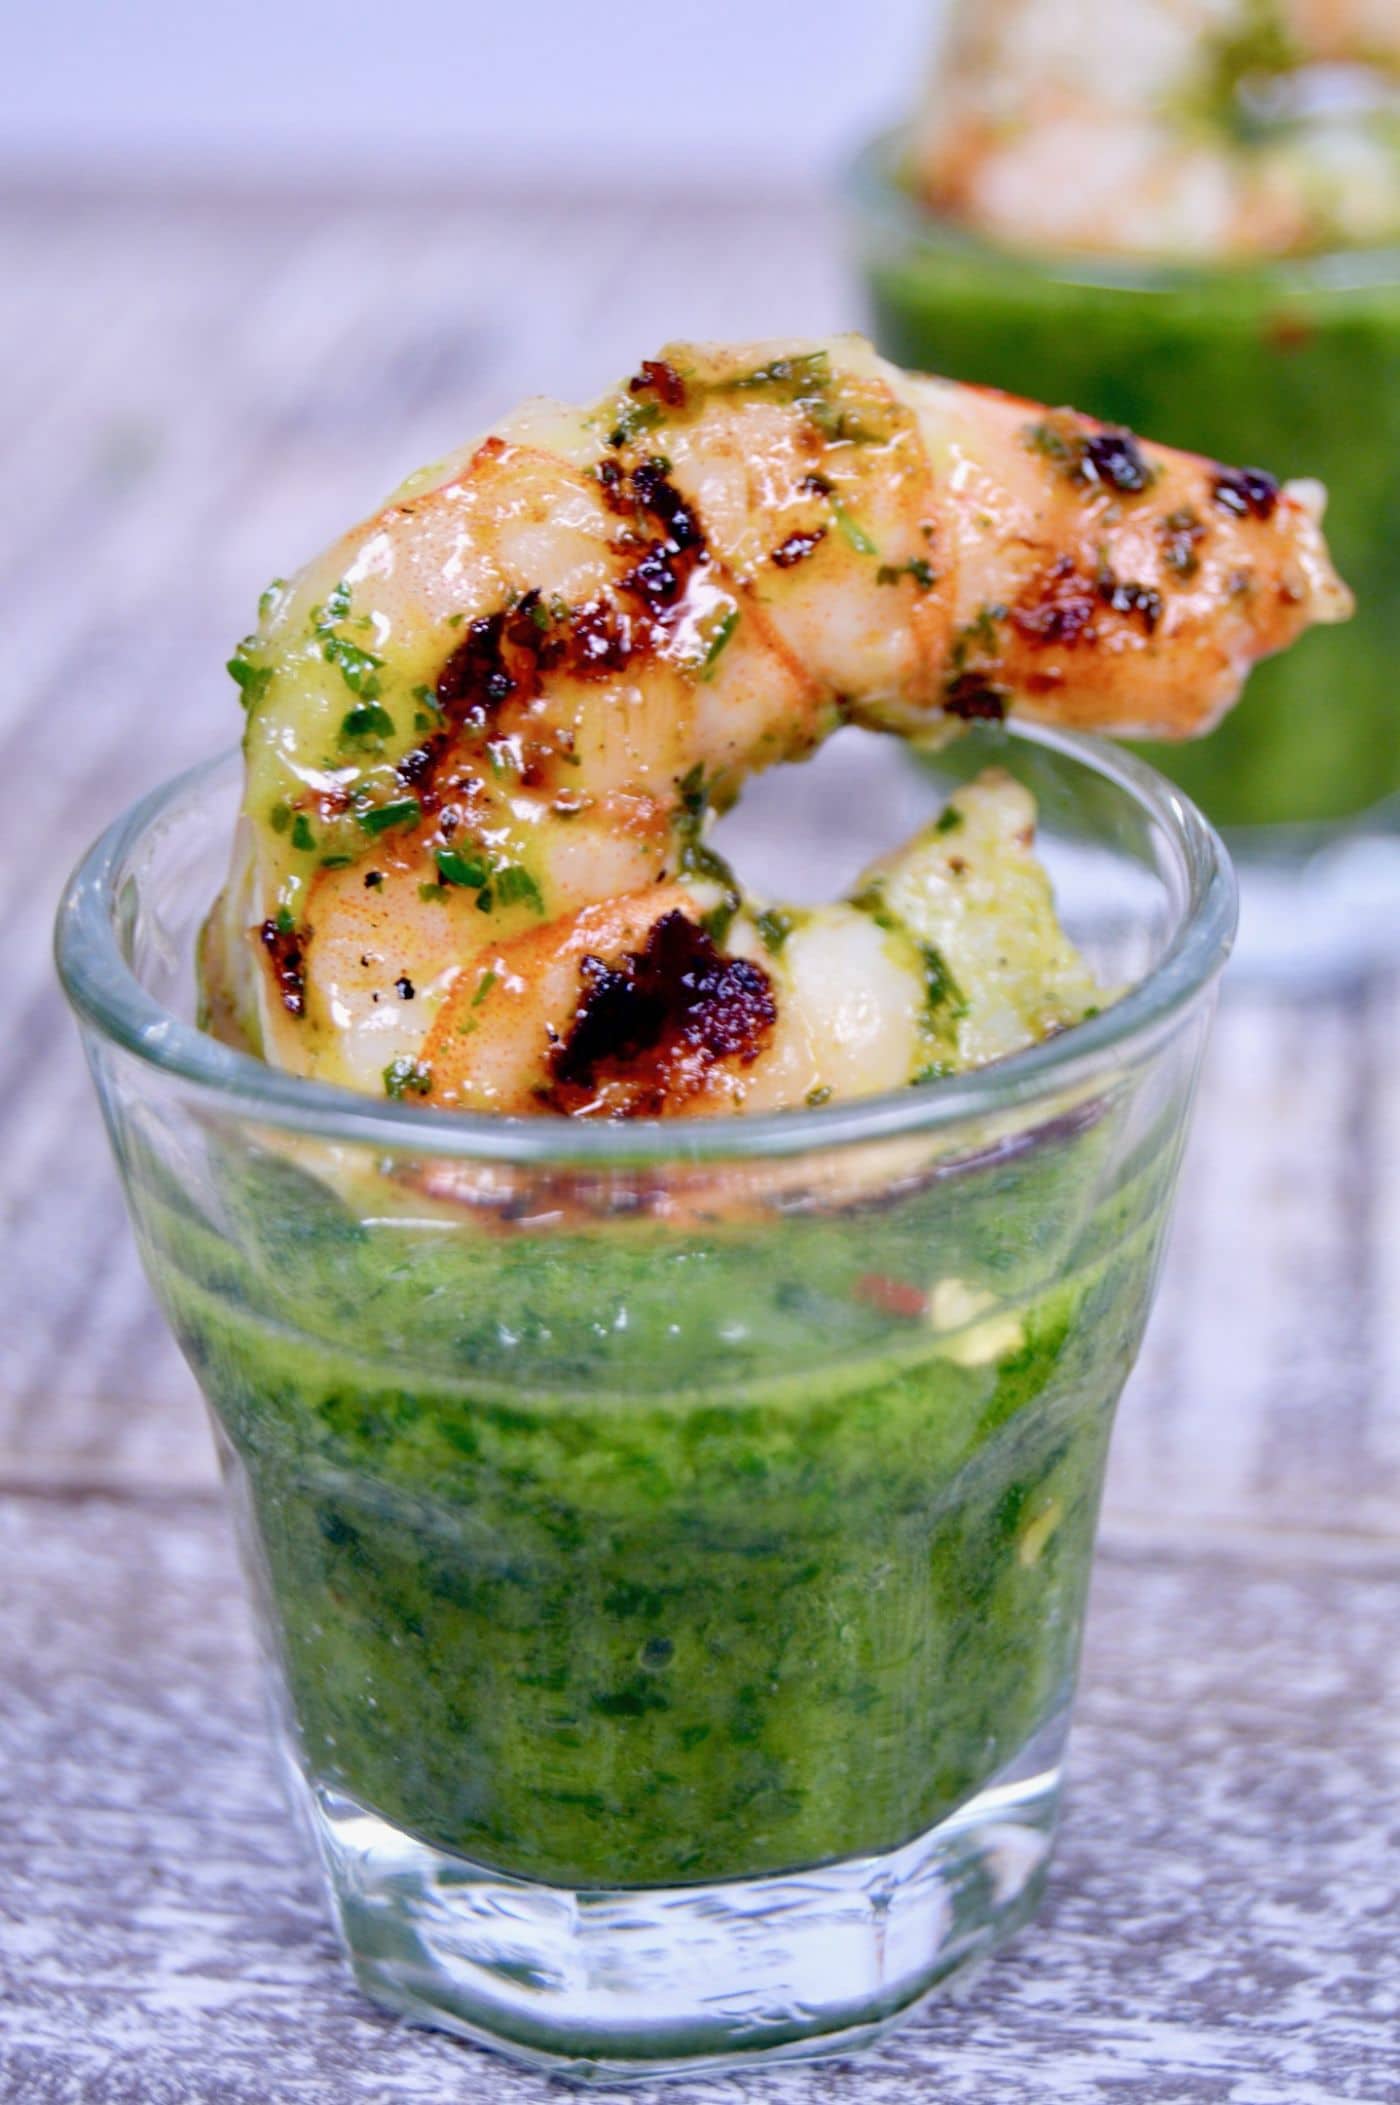 Fresh Herb Sauce, aka Chimichurri is a versatile sauce that can be made ahead and then tossed on anything to really boost the flavor. Veggies, Pasta and any protein. Works great as a dipping sauce for breads too!